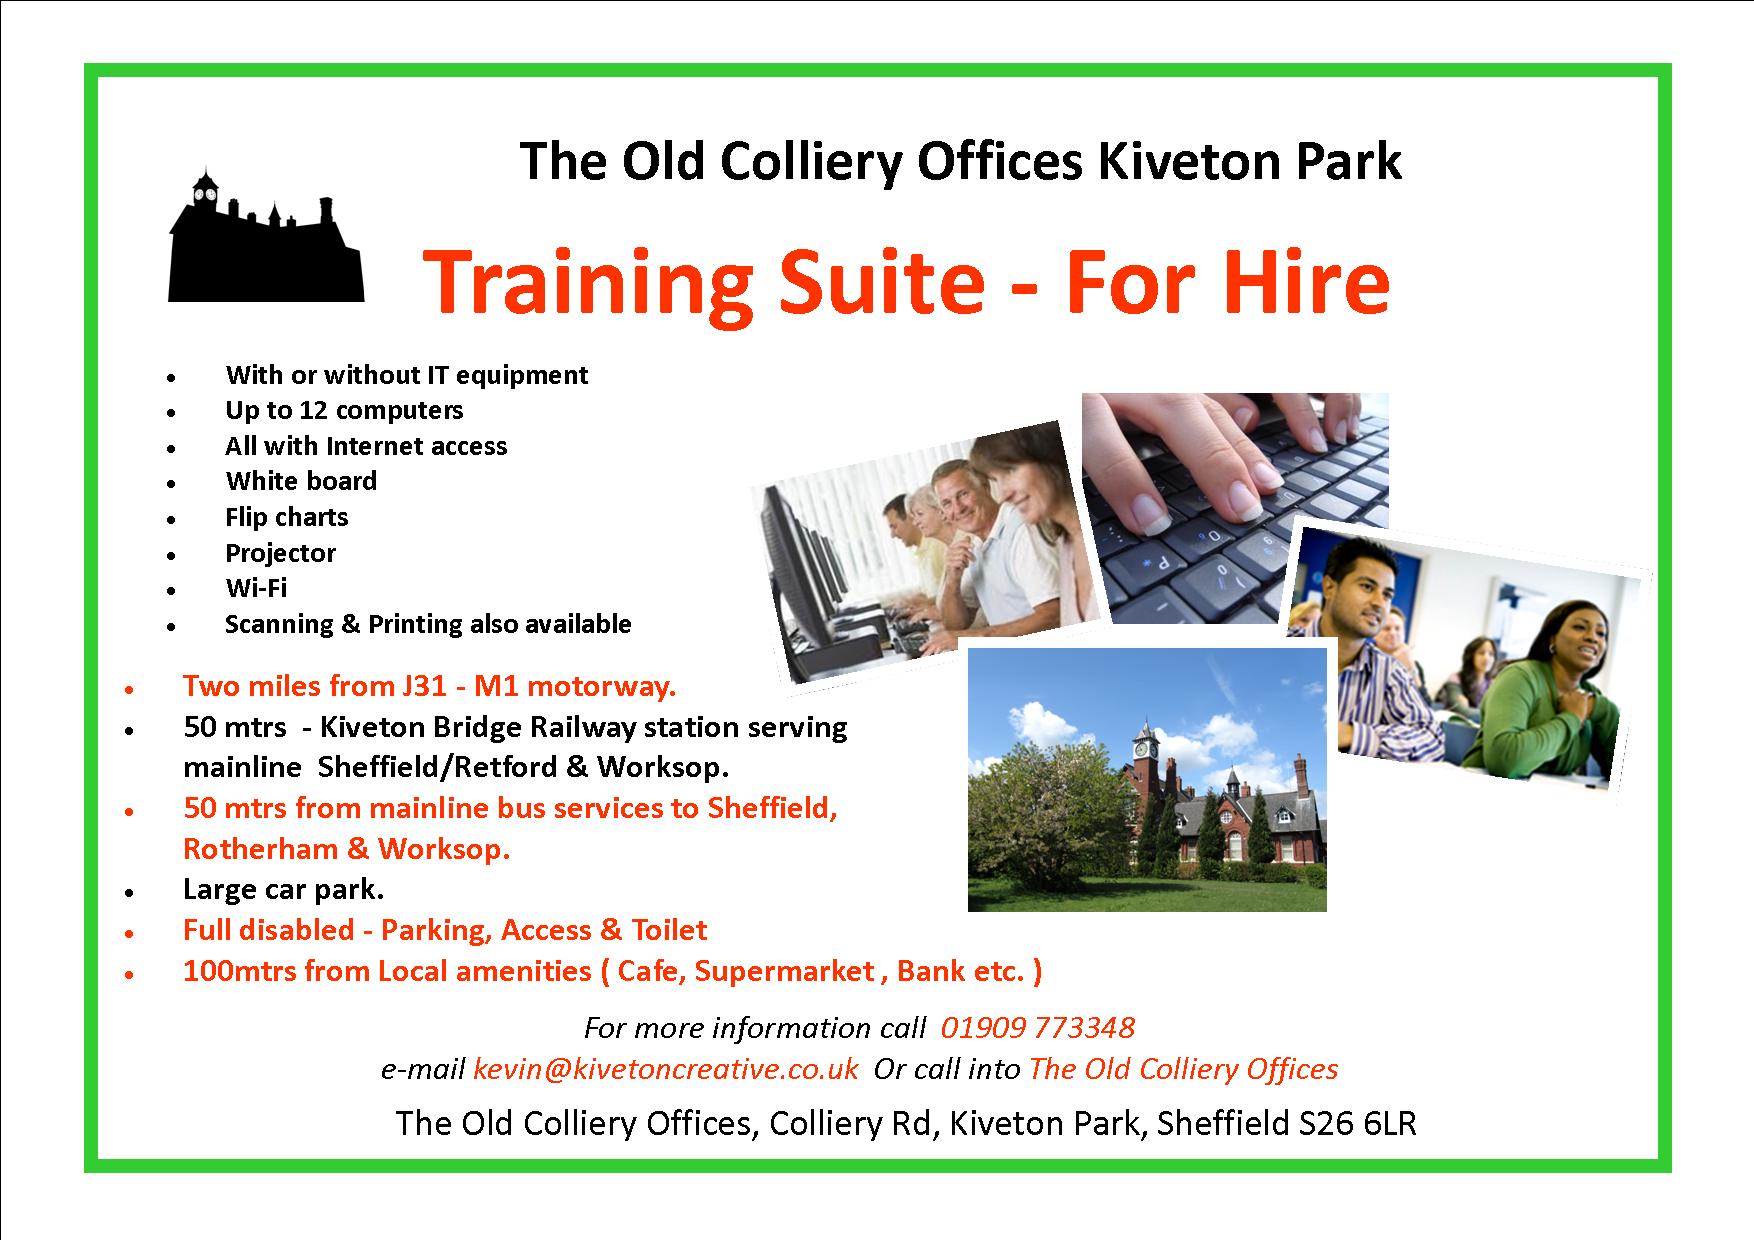 Training Suite for hire